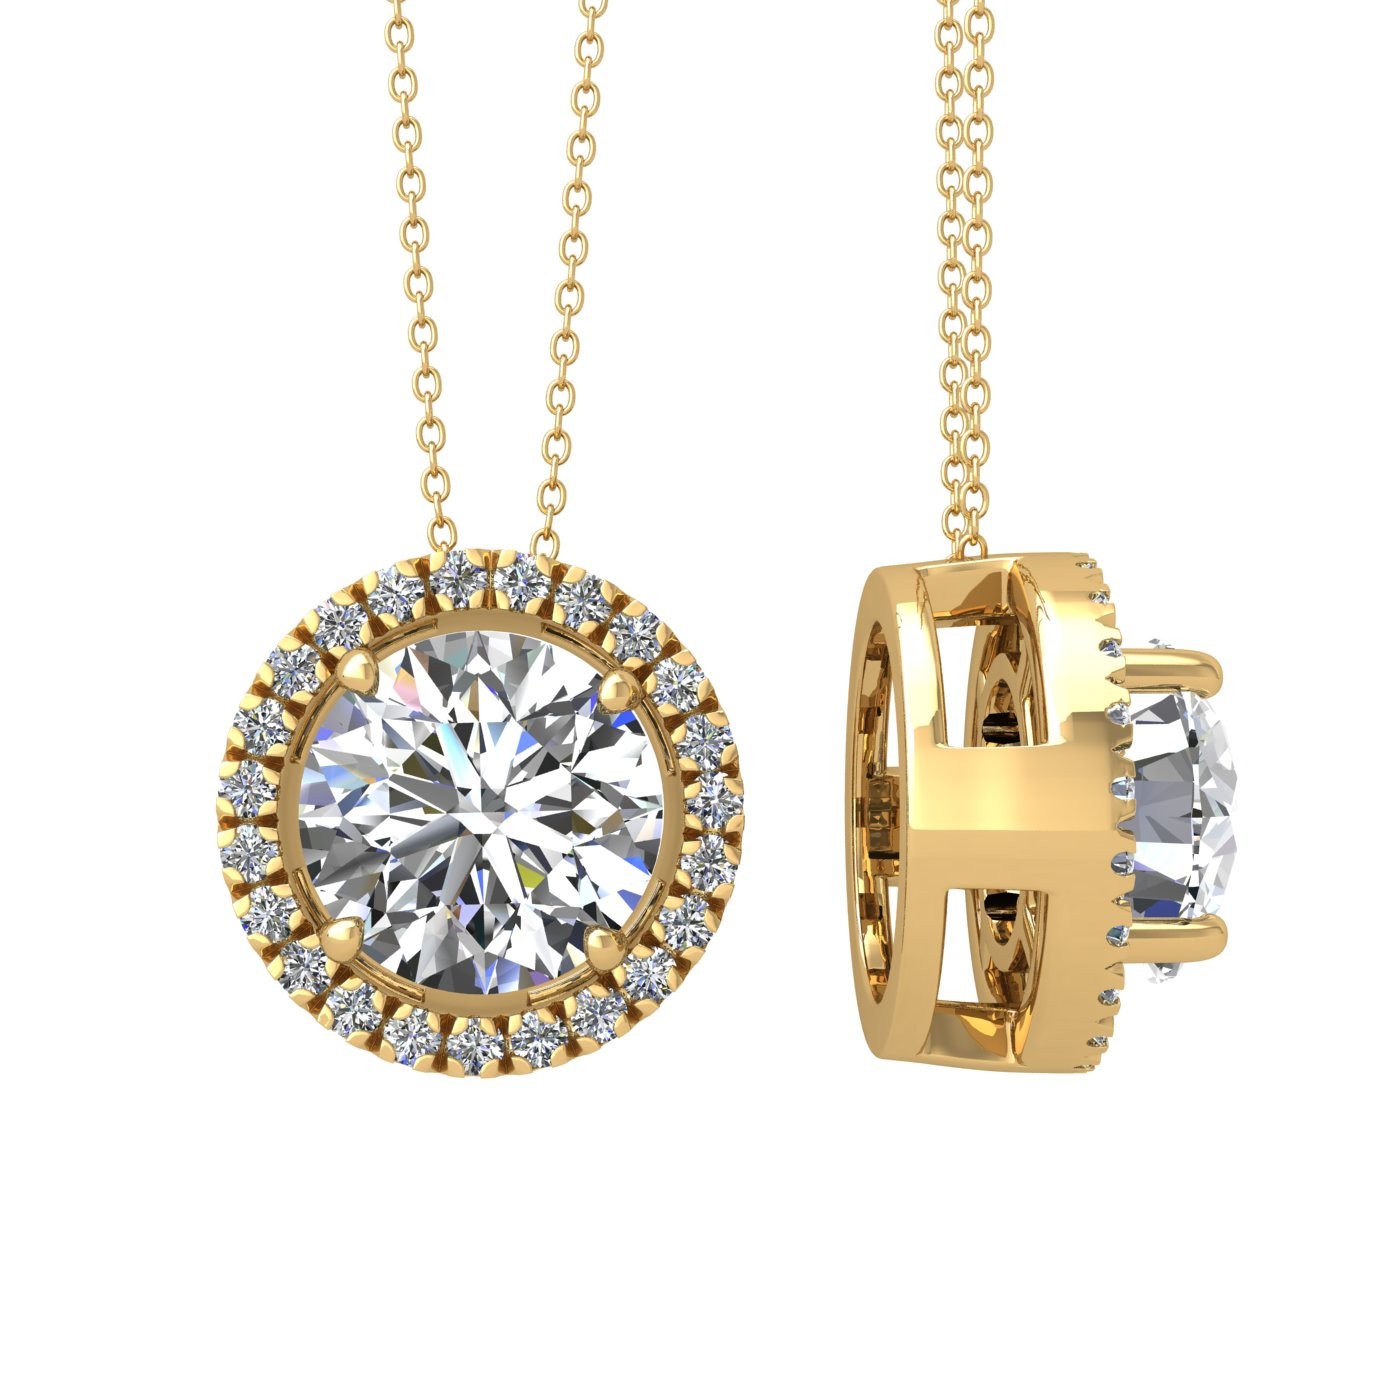 18k yellow gold  1,2 ct 4 prong round shape diamond pendant with diamond pavÉ set halo including chain seperate from the pendant Photos & images